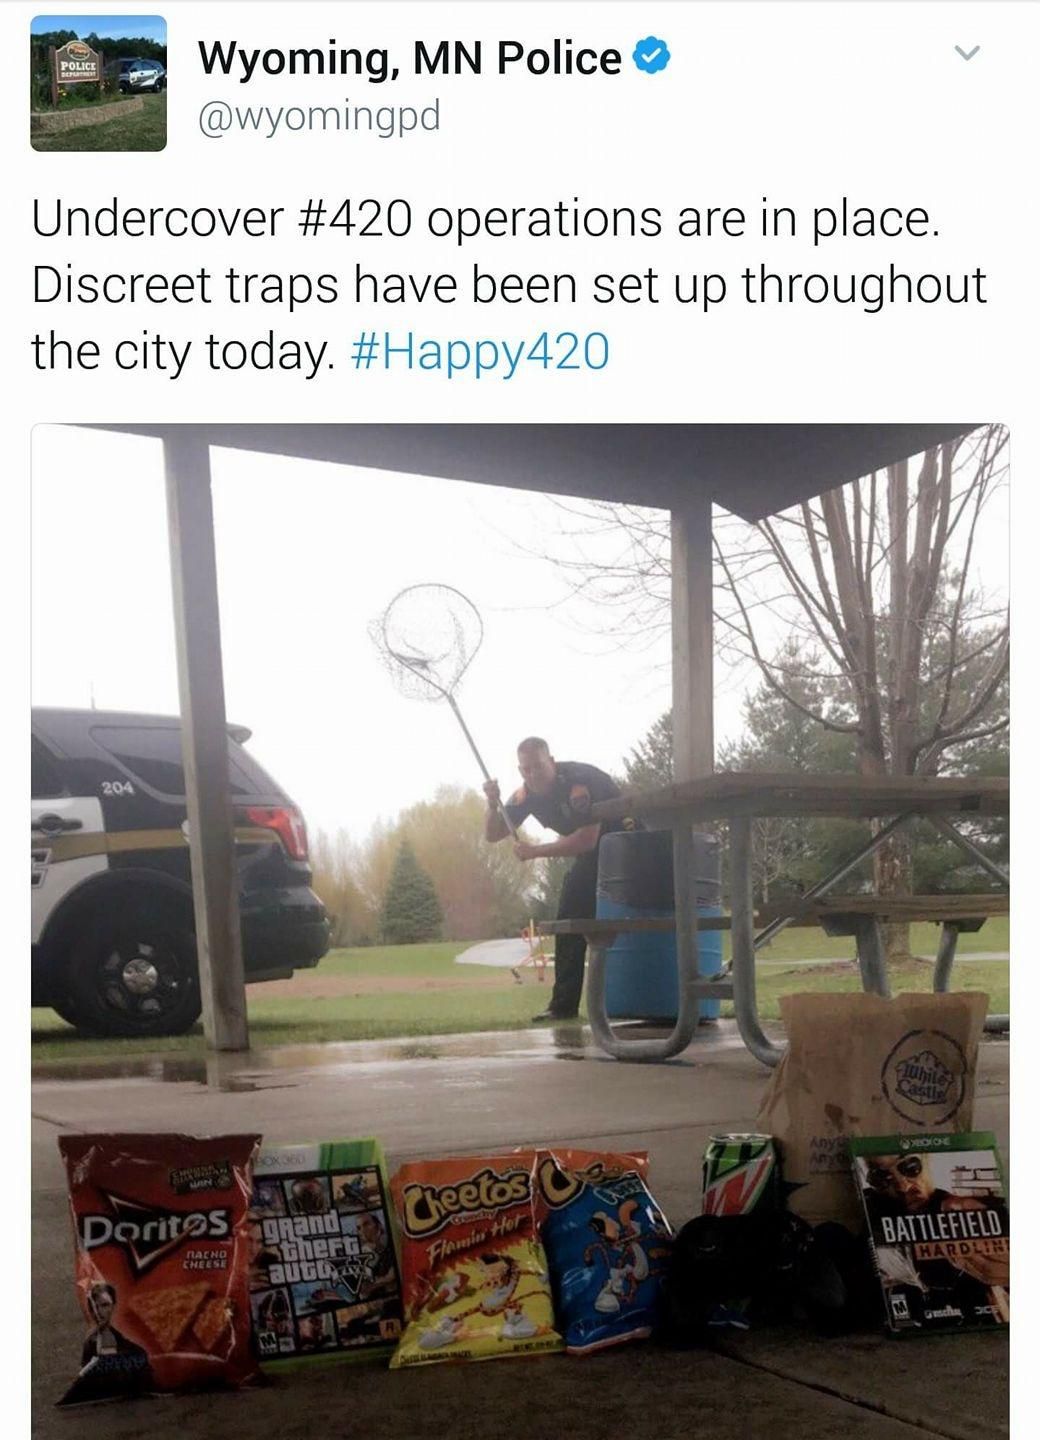 4 20 police trap - Police Der Wyoming, Mn Police Undercover operations are in place. Discreet traps have been set up throughout the city today. Doritos grand Battlefield Cheese Famin Ho Rde theft Saugos